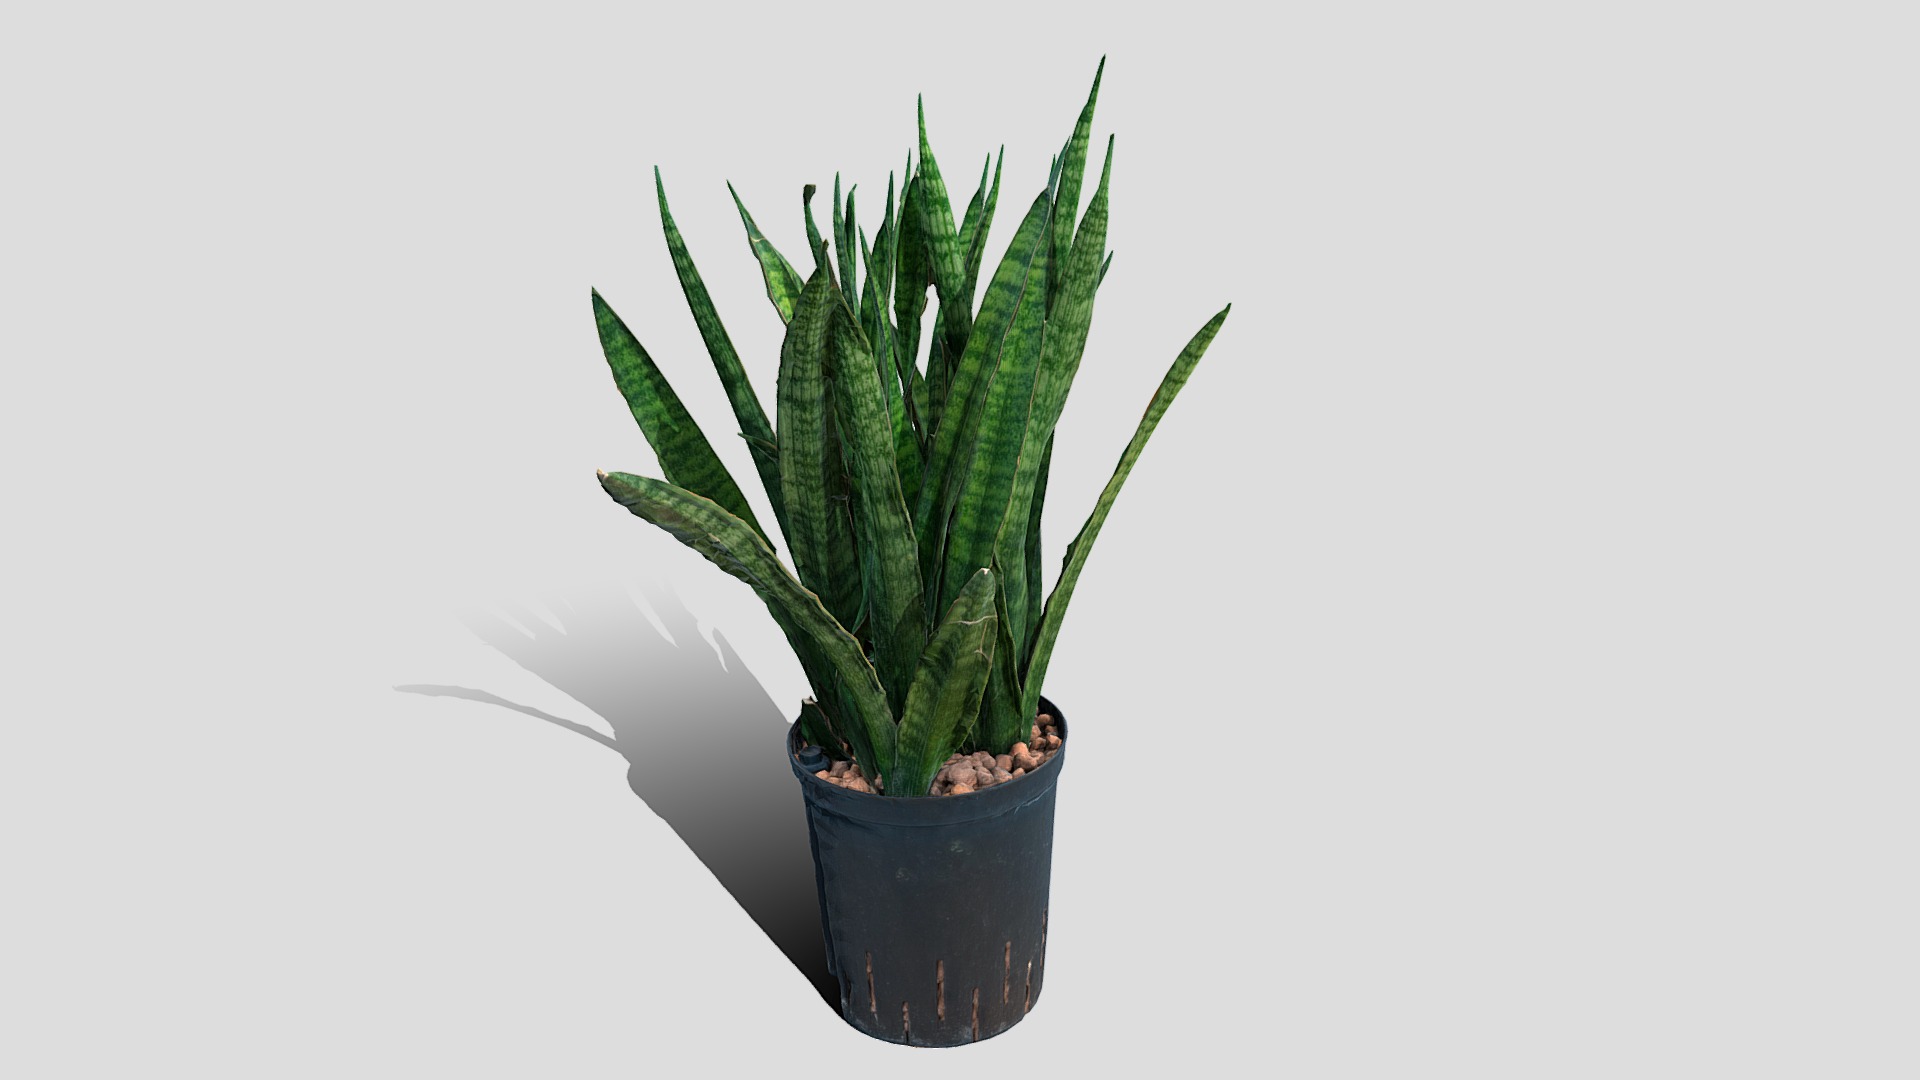 3D model 000025_Sansevieria - This is a 3D model of the 000025_Sansevieria. The 3D model is about a potted plant with a green leaf.